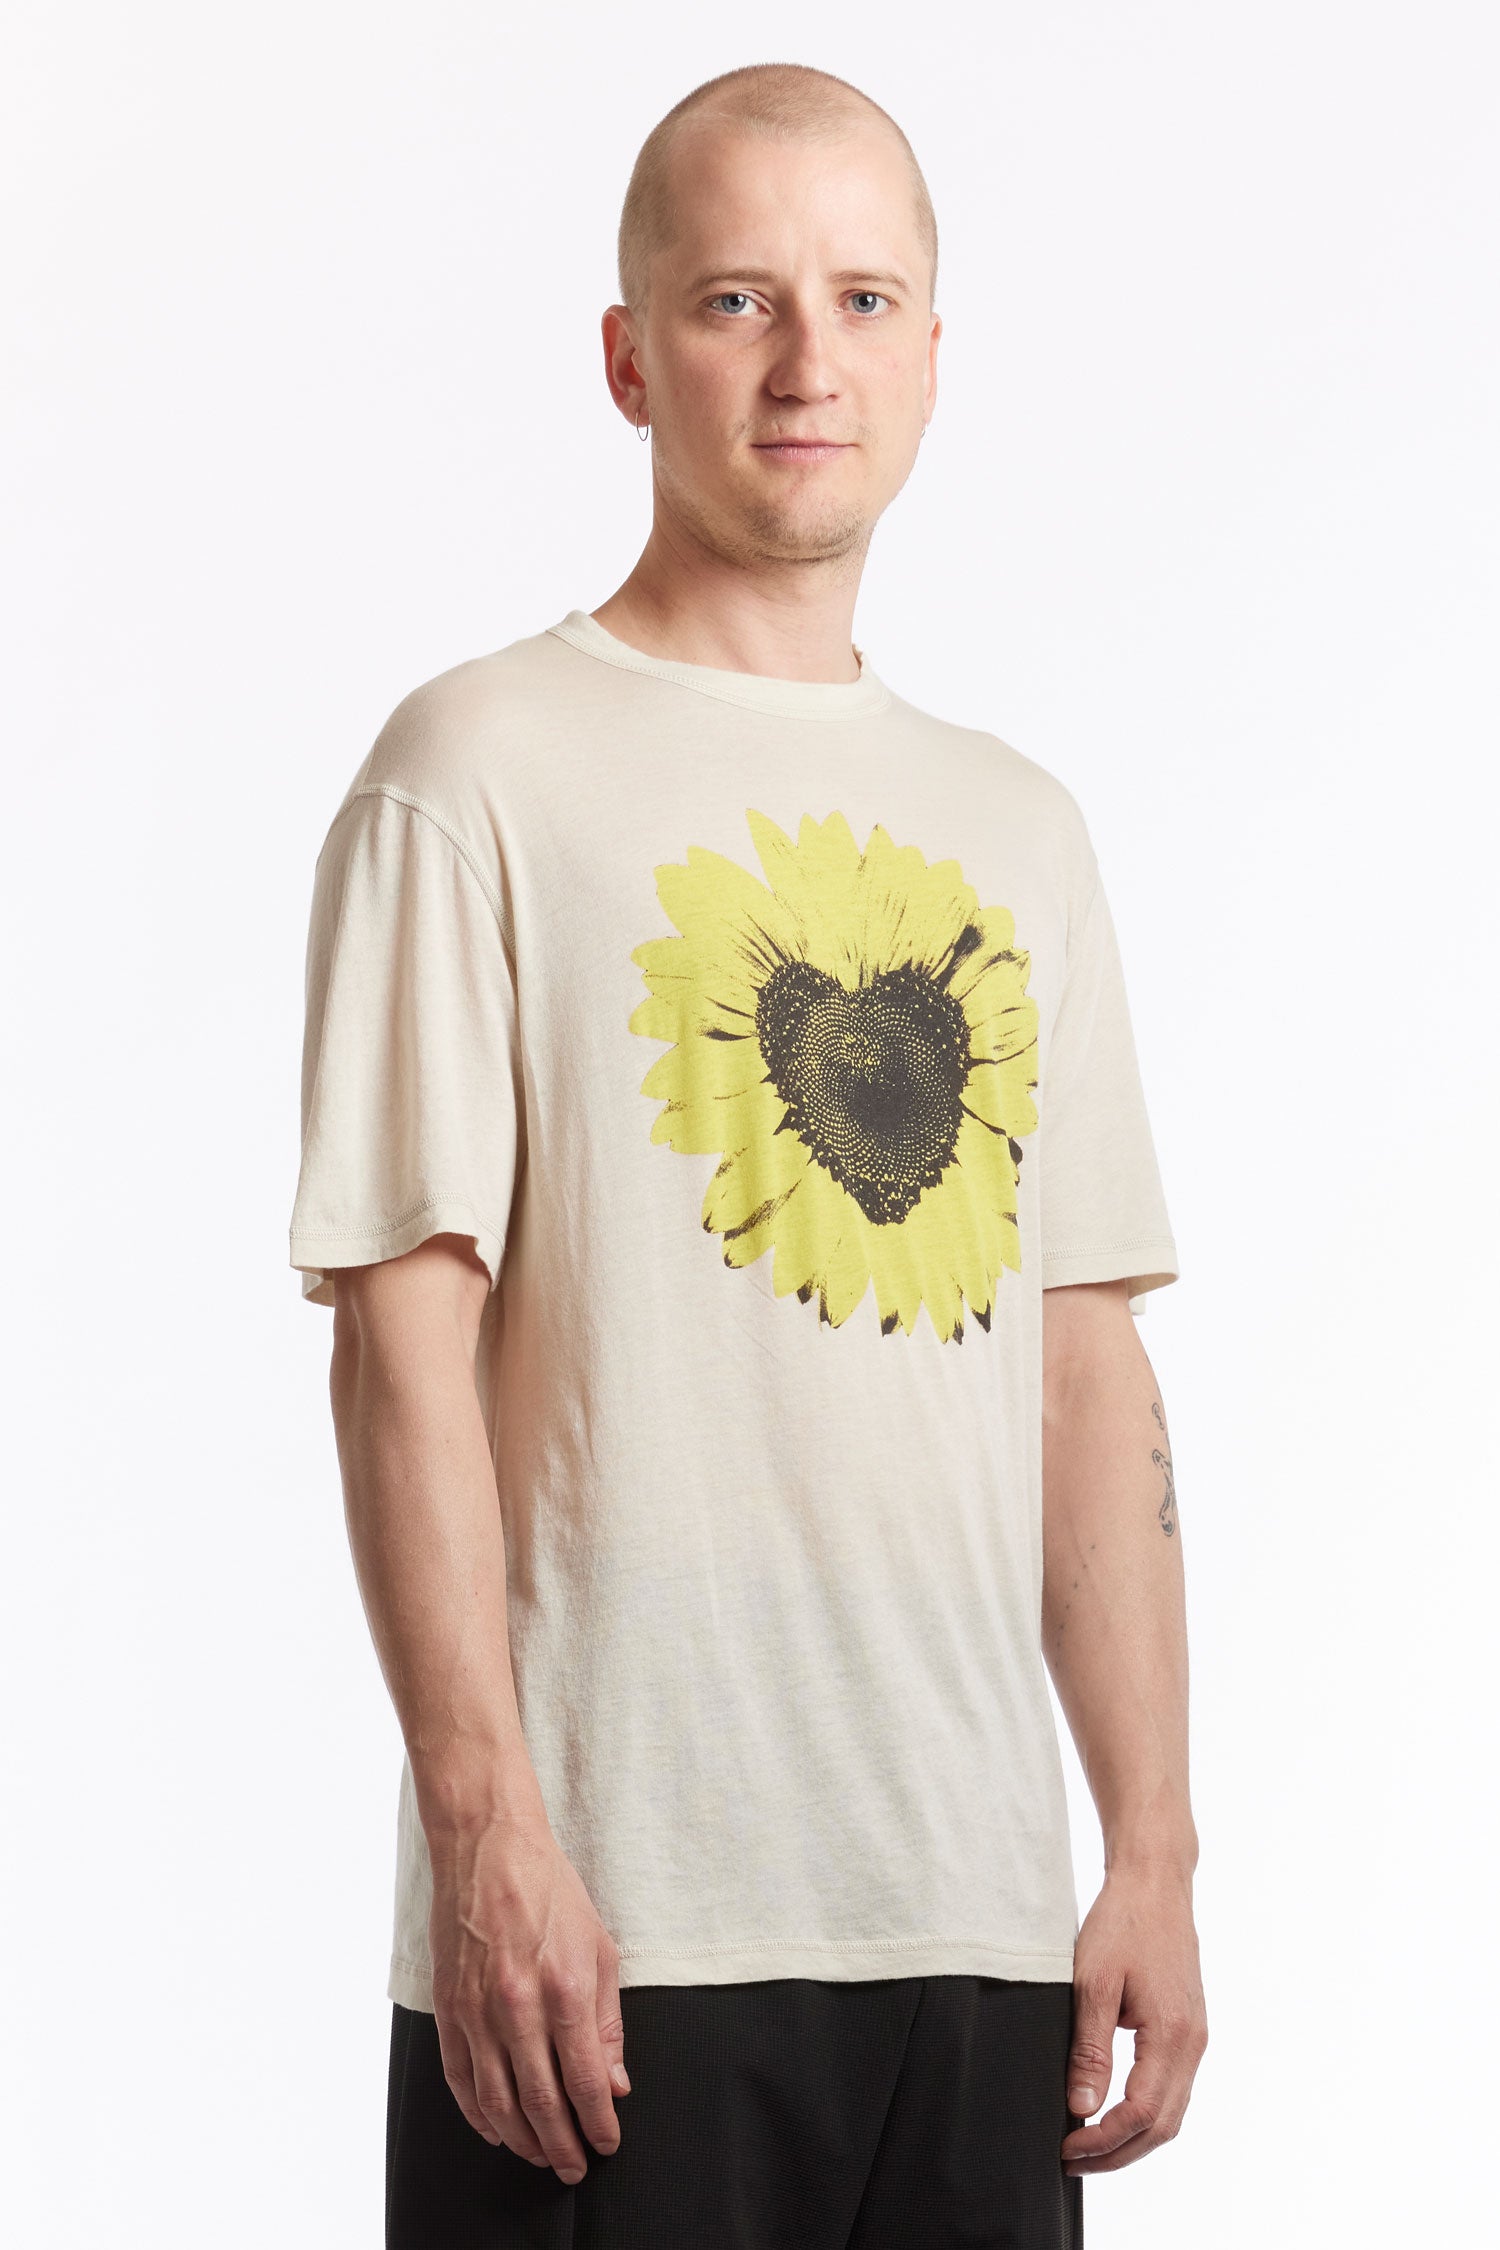 The AFFXWRKS - FLORA TEE  available online with global shipping, and in PAM Stores Melbourne and Sydney.